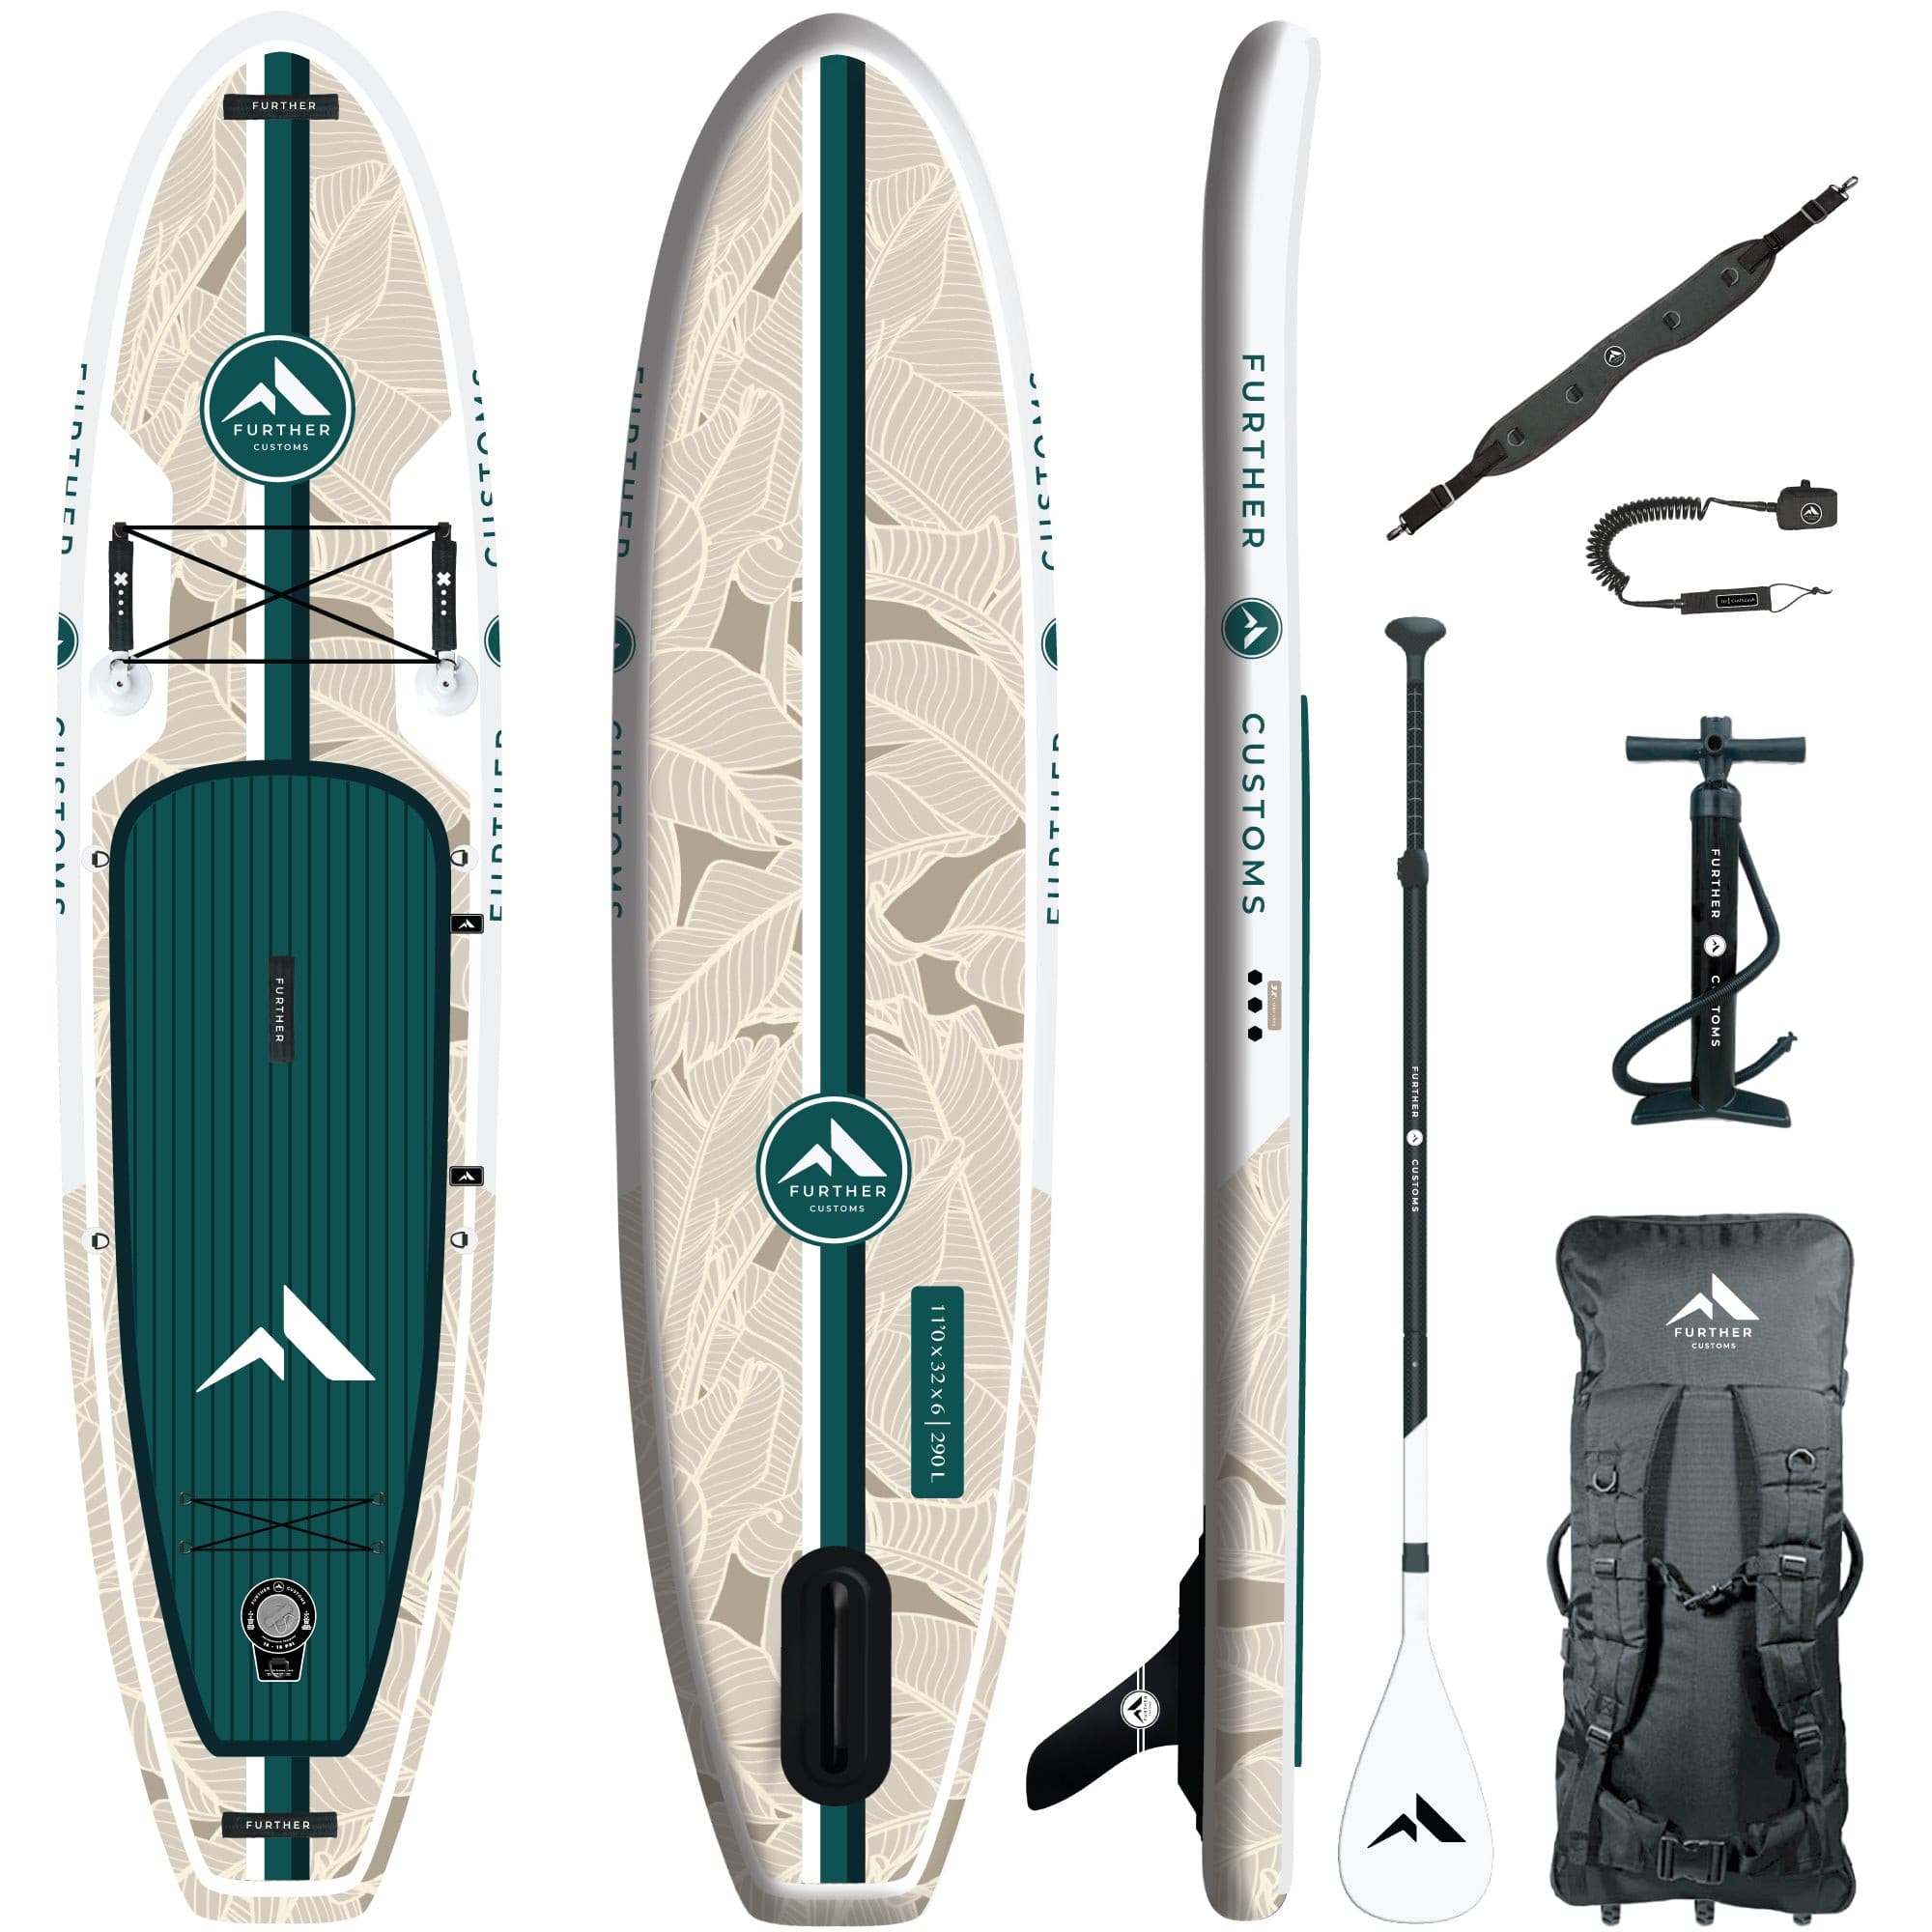 Further Customs Avalon Emerald Inflatable Paddleboard Kit